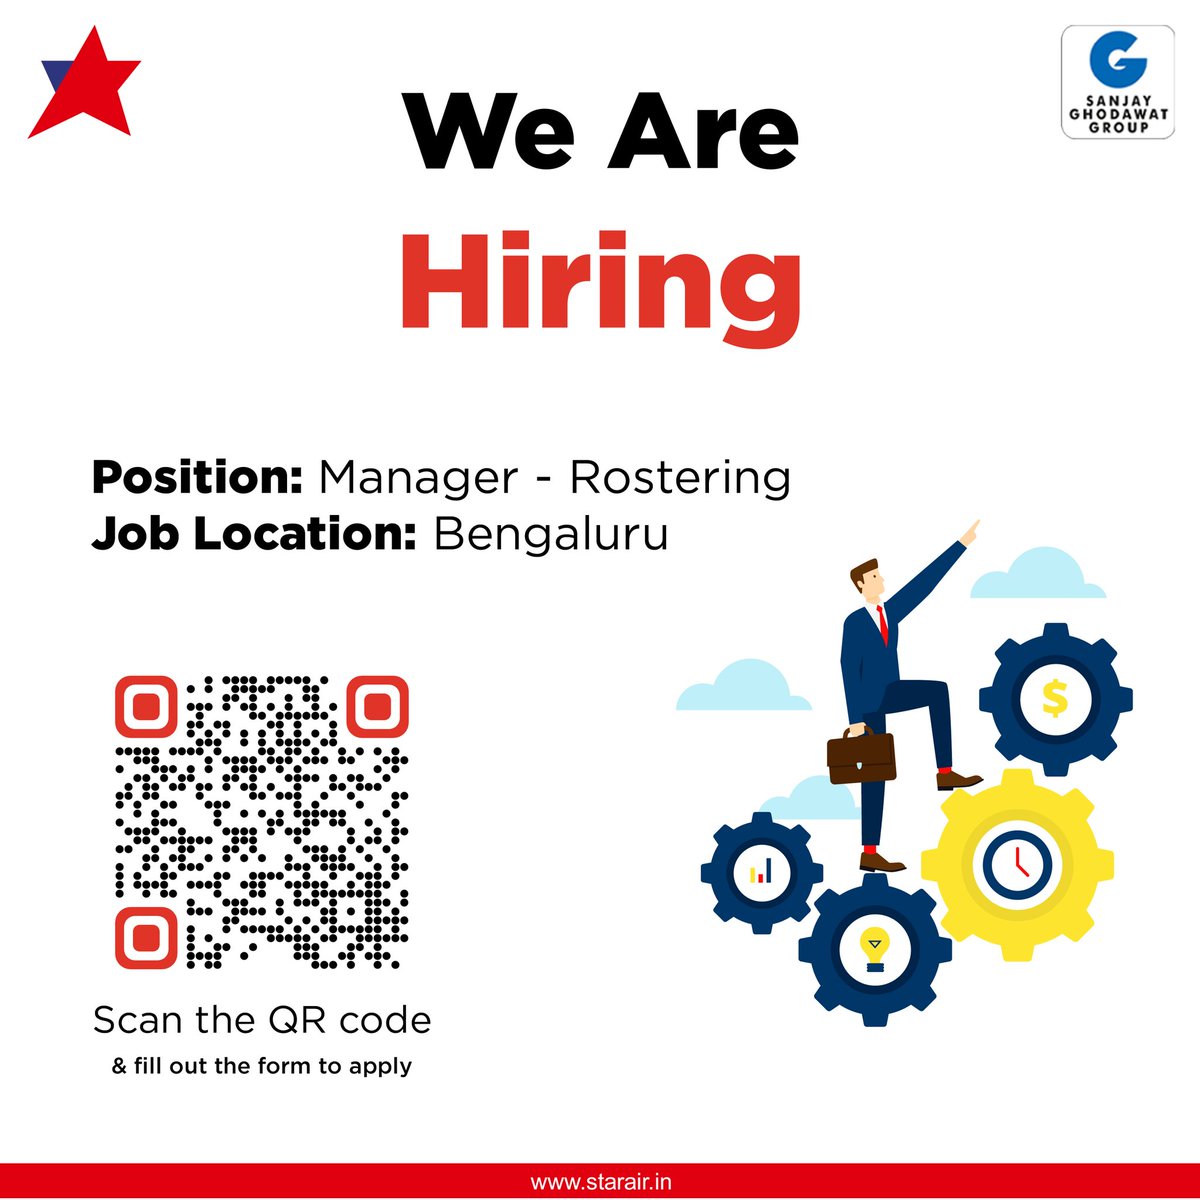 We are hiring!

Star Air is looking for a Rostering Manager in Bengaluru.

Scan the QR code and fill out your details! 

#OfficialStarAir #WeCare #ConnectingReallndia #FlyNonStop #FlyWithStarAir #SGGRising #IndianAviation #Hiring #AirlineRecruitment #AviationHiring #Bangalore